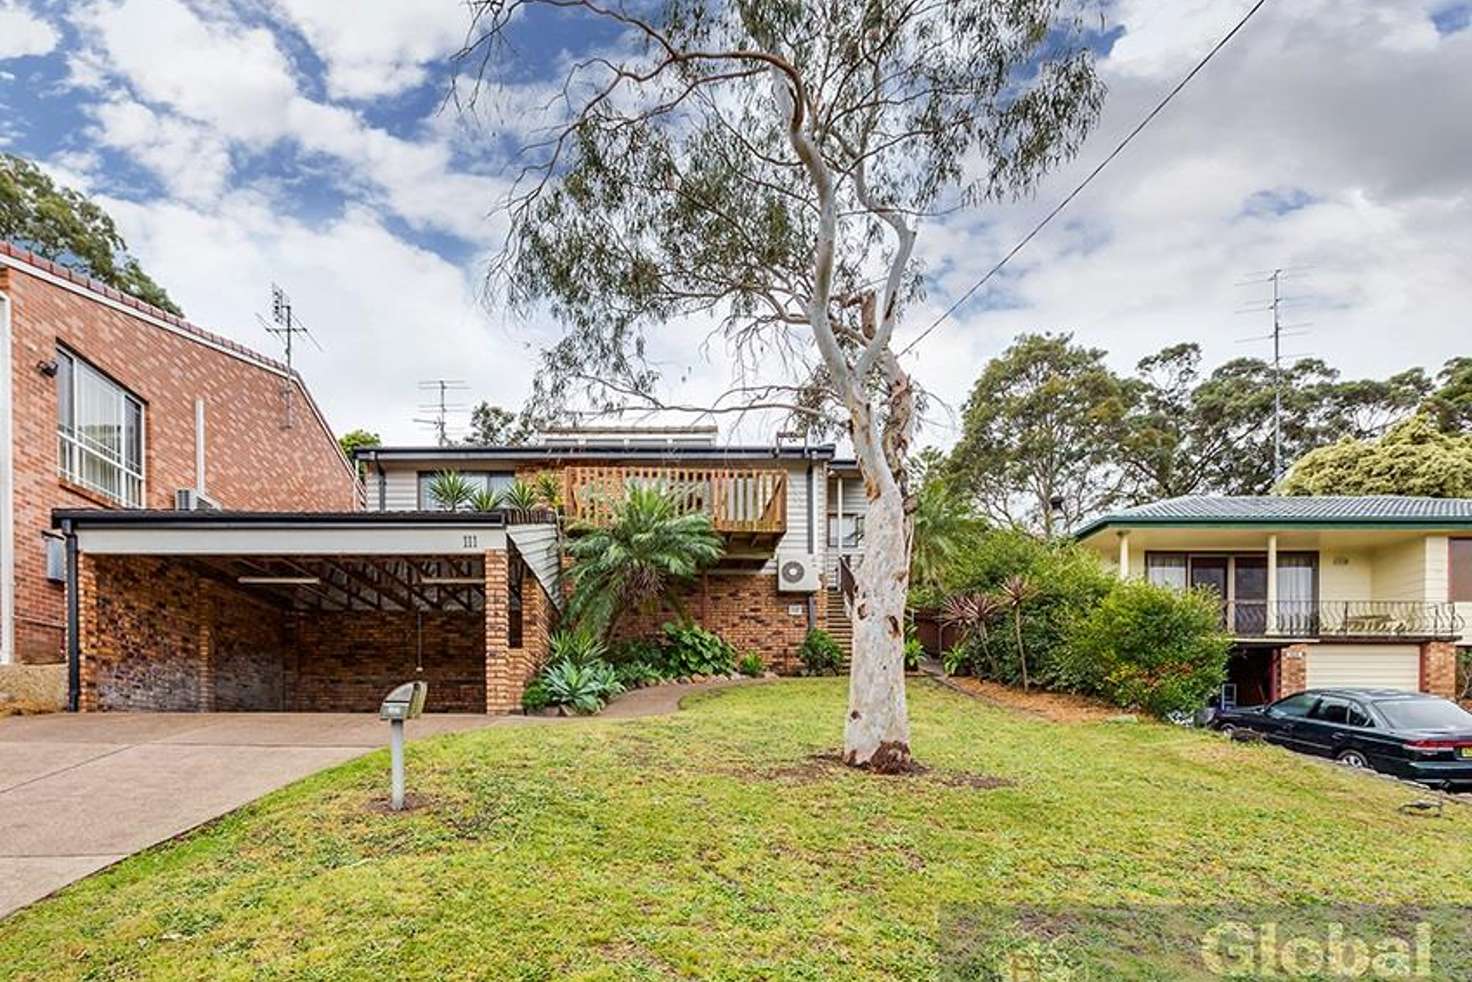 Main view of Homely house listing, 111 Graham Street, Glendale NSW 2285